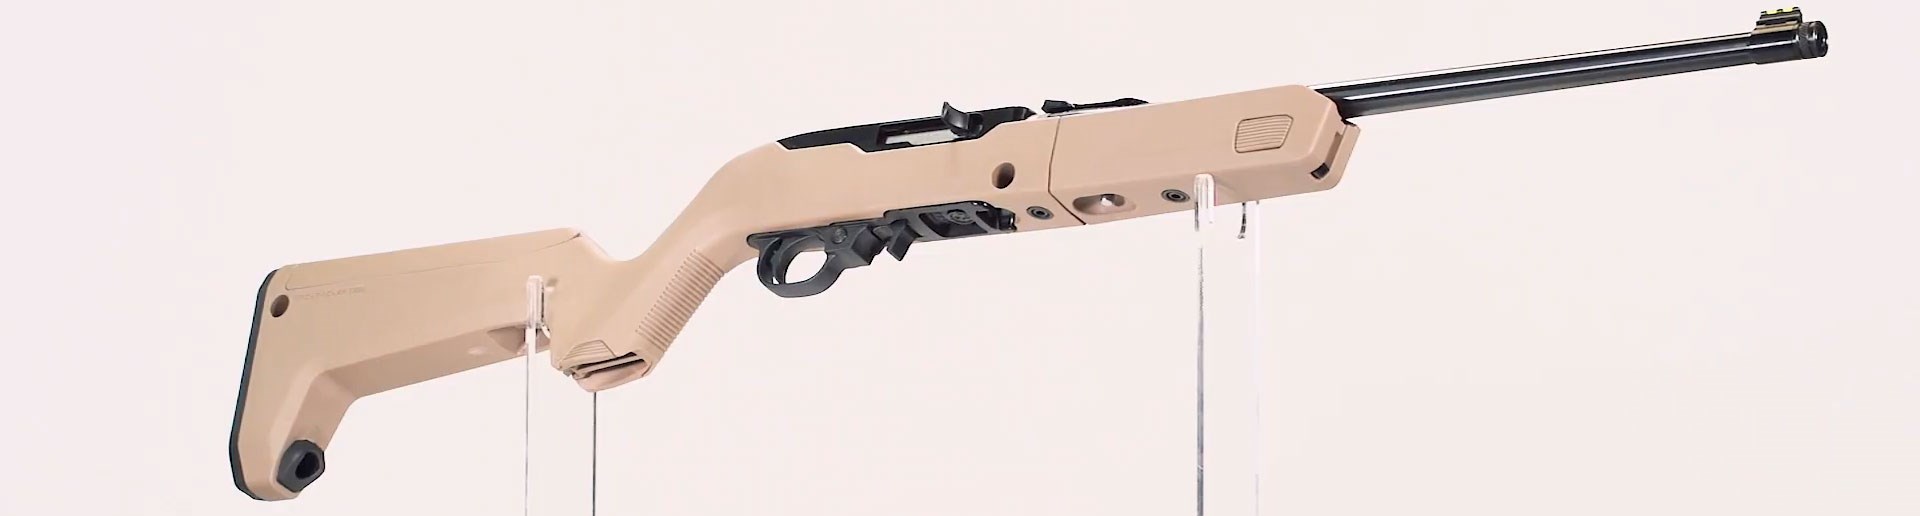 Ruger 10/22 FDE Takedown Magpul on white